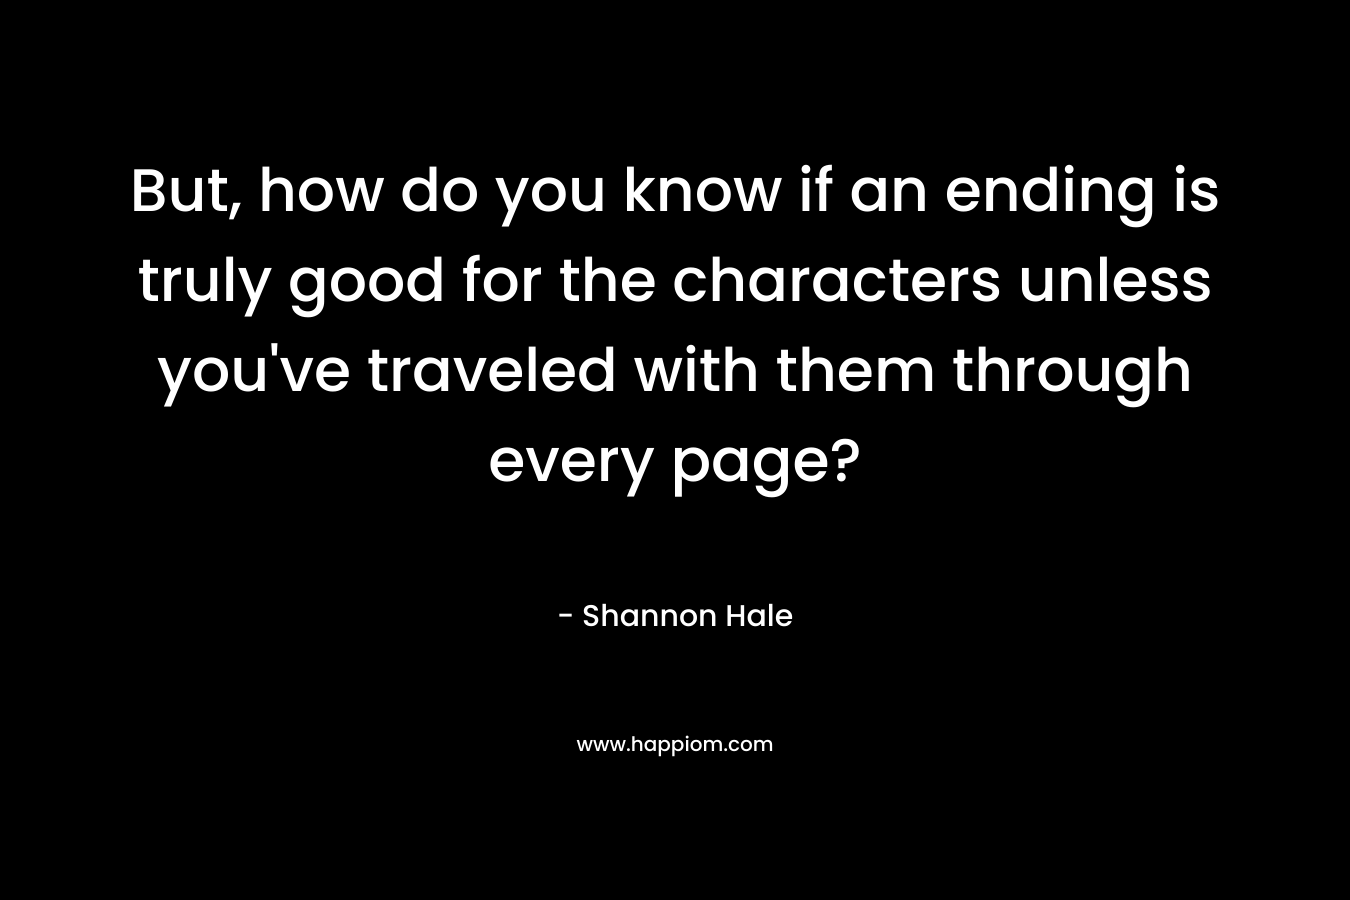 But, how do you know if an ending is truly good for the characters unless you've traveled with them through every page?